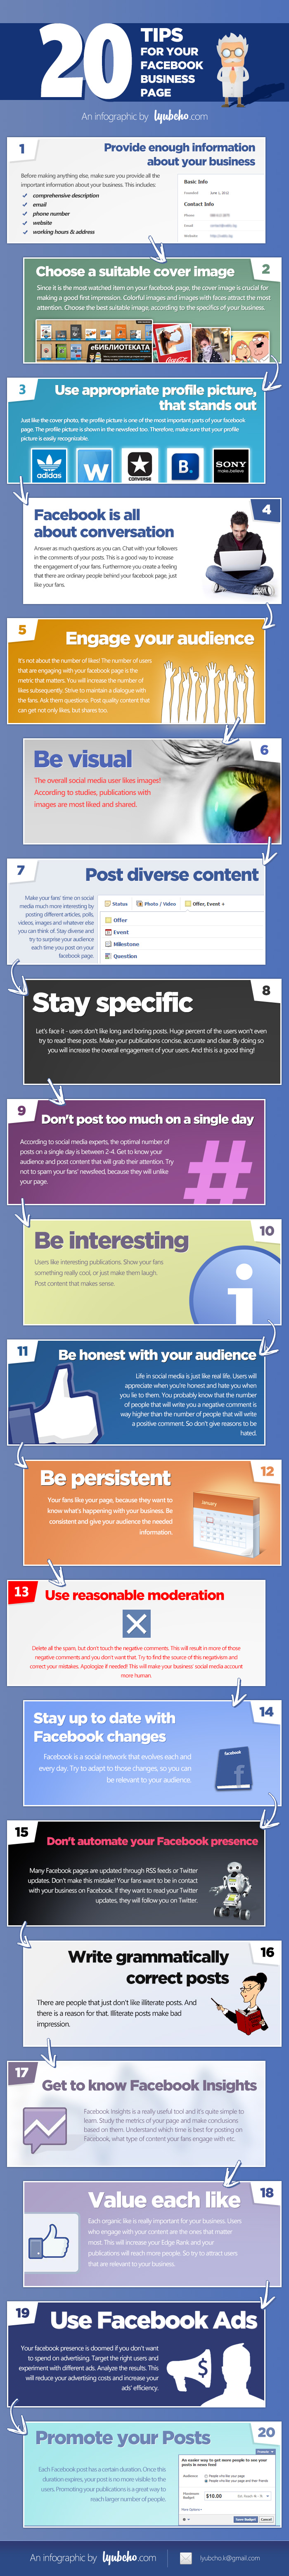 20 Tips for your Facebook Business Page